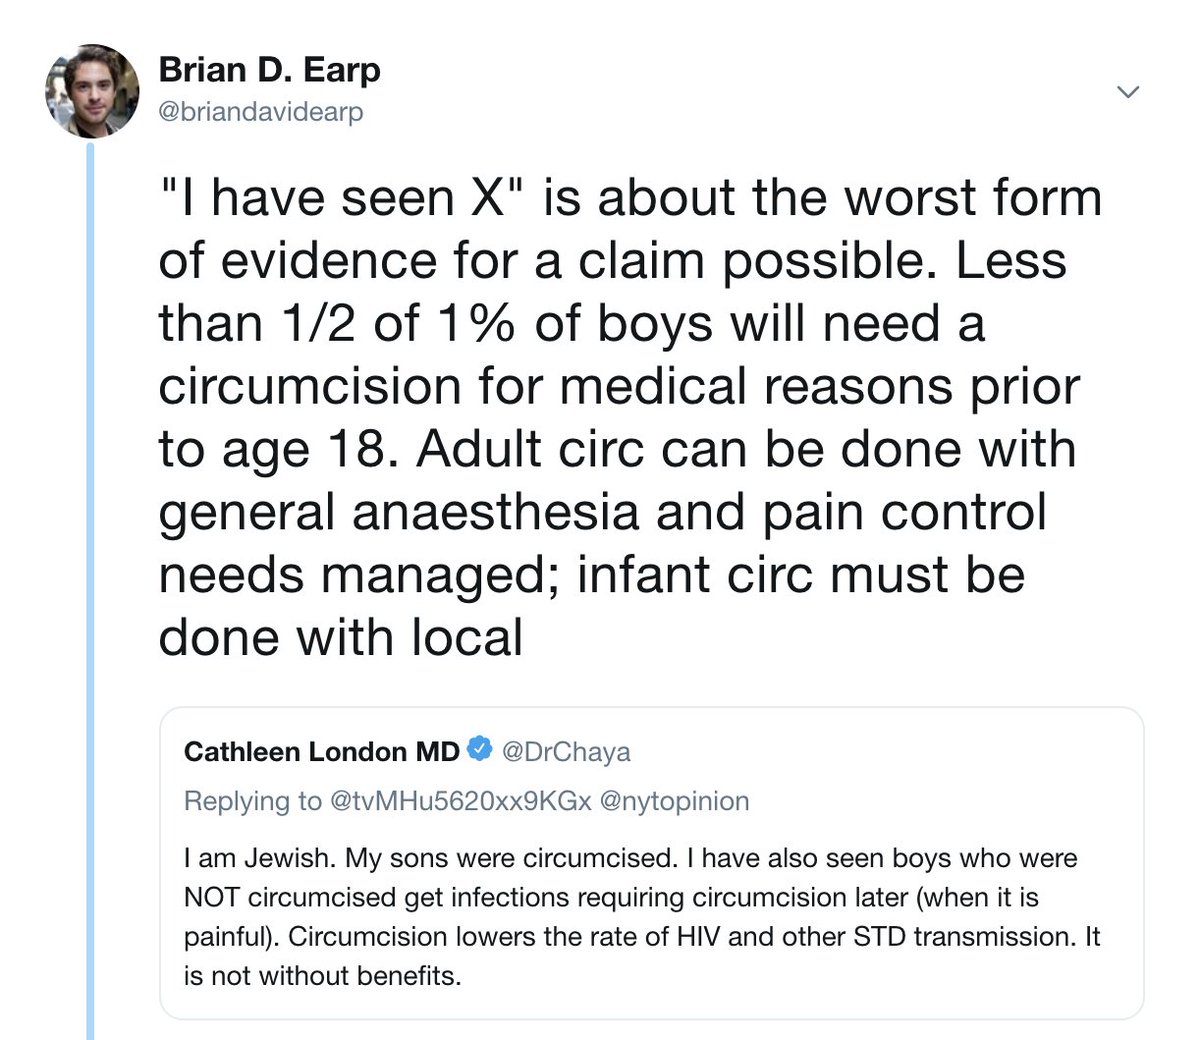 Indeed,  @DrChaya herself has performed medically unnecessary circumcisions on non-consenting, healthy patients, & had this done to her sons. So she may be highly motivated to find a clear distinction between this practice and "FGM" which she agrees is morally wrong (see below).